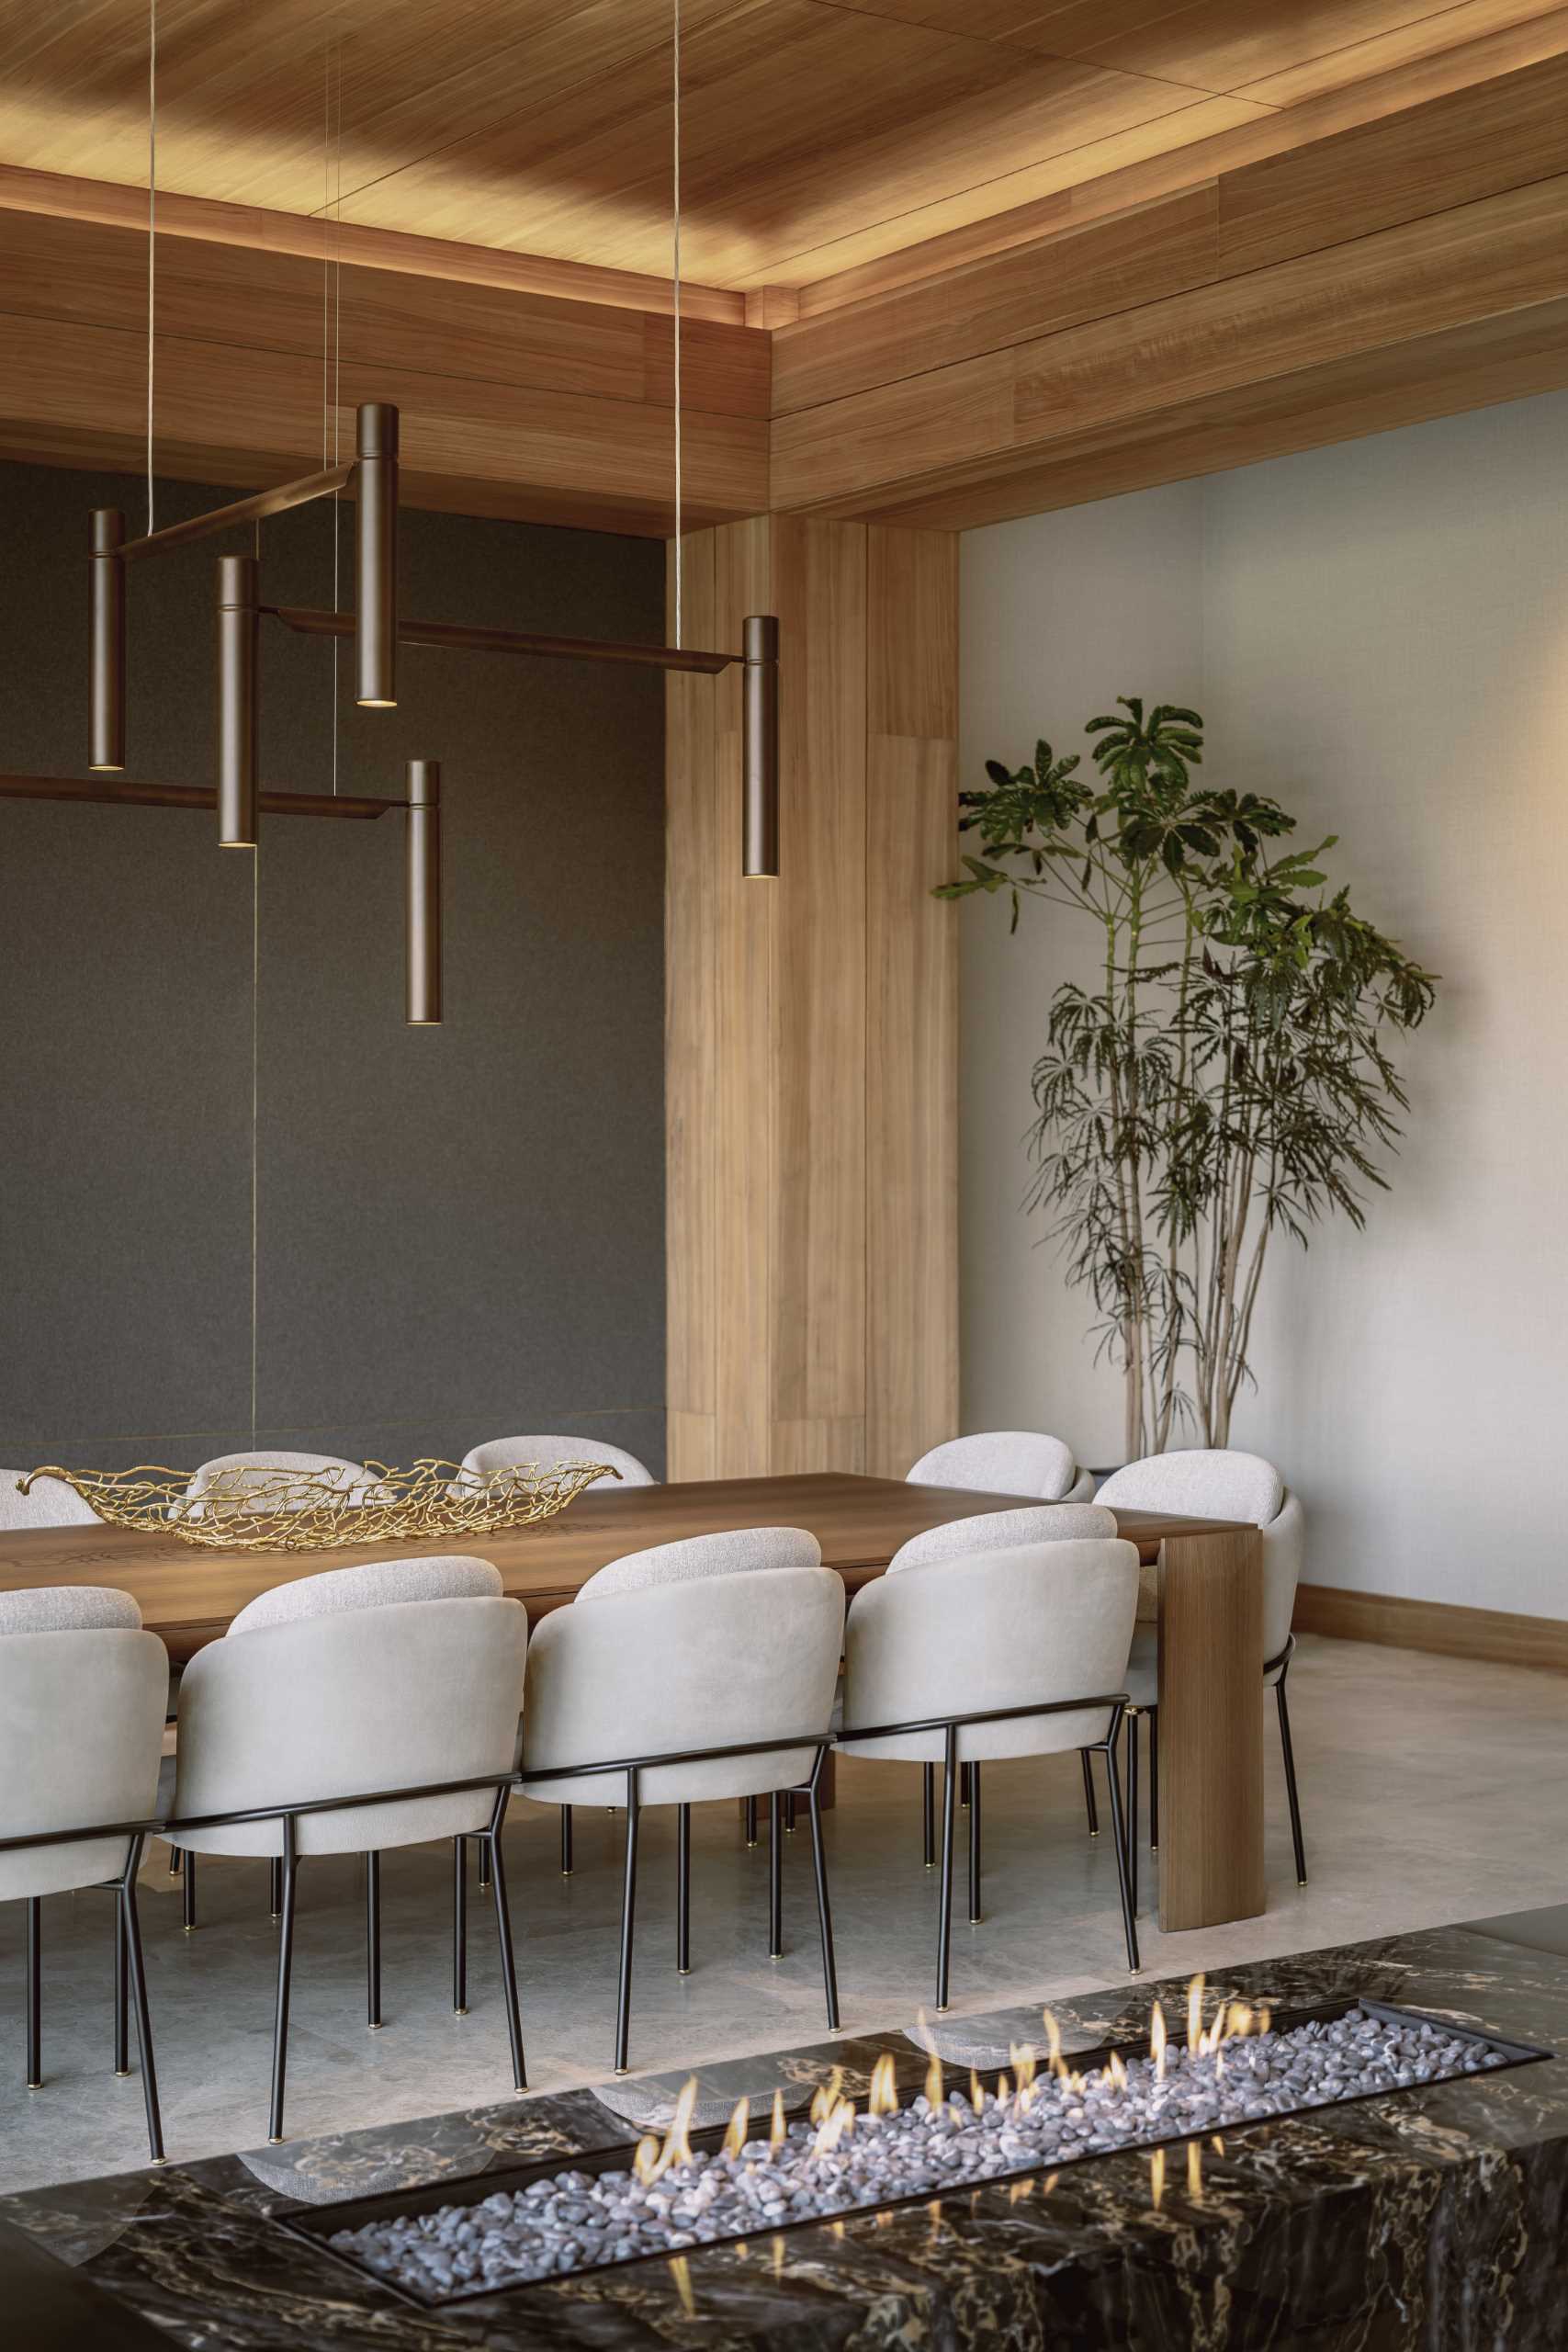 A modern dining room with a dark accent wall and hidden lighting that showcases the wood ceiling.